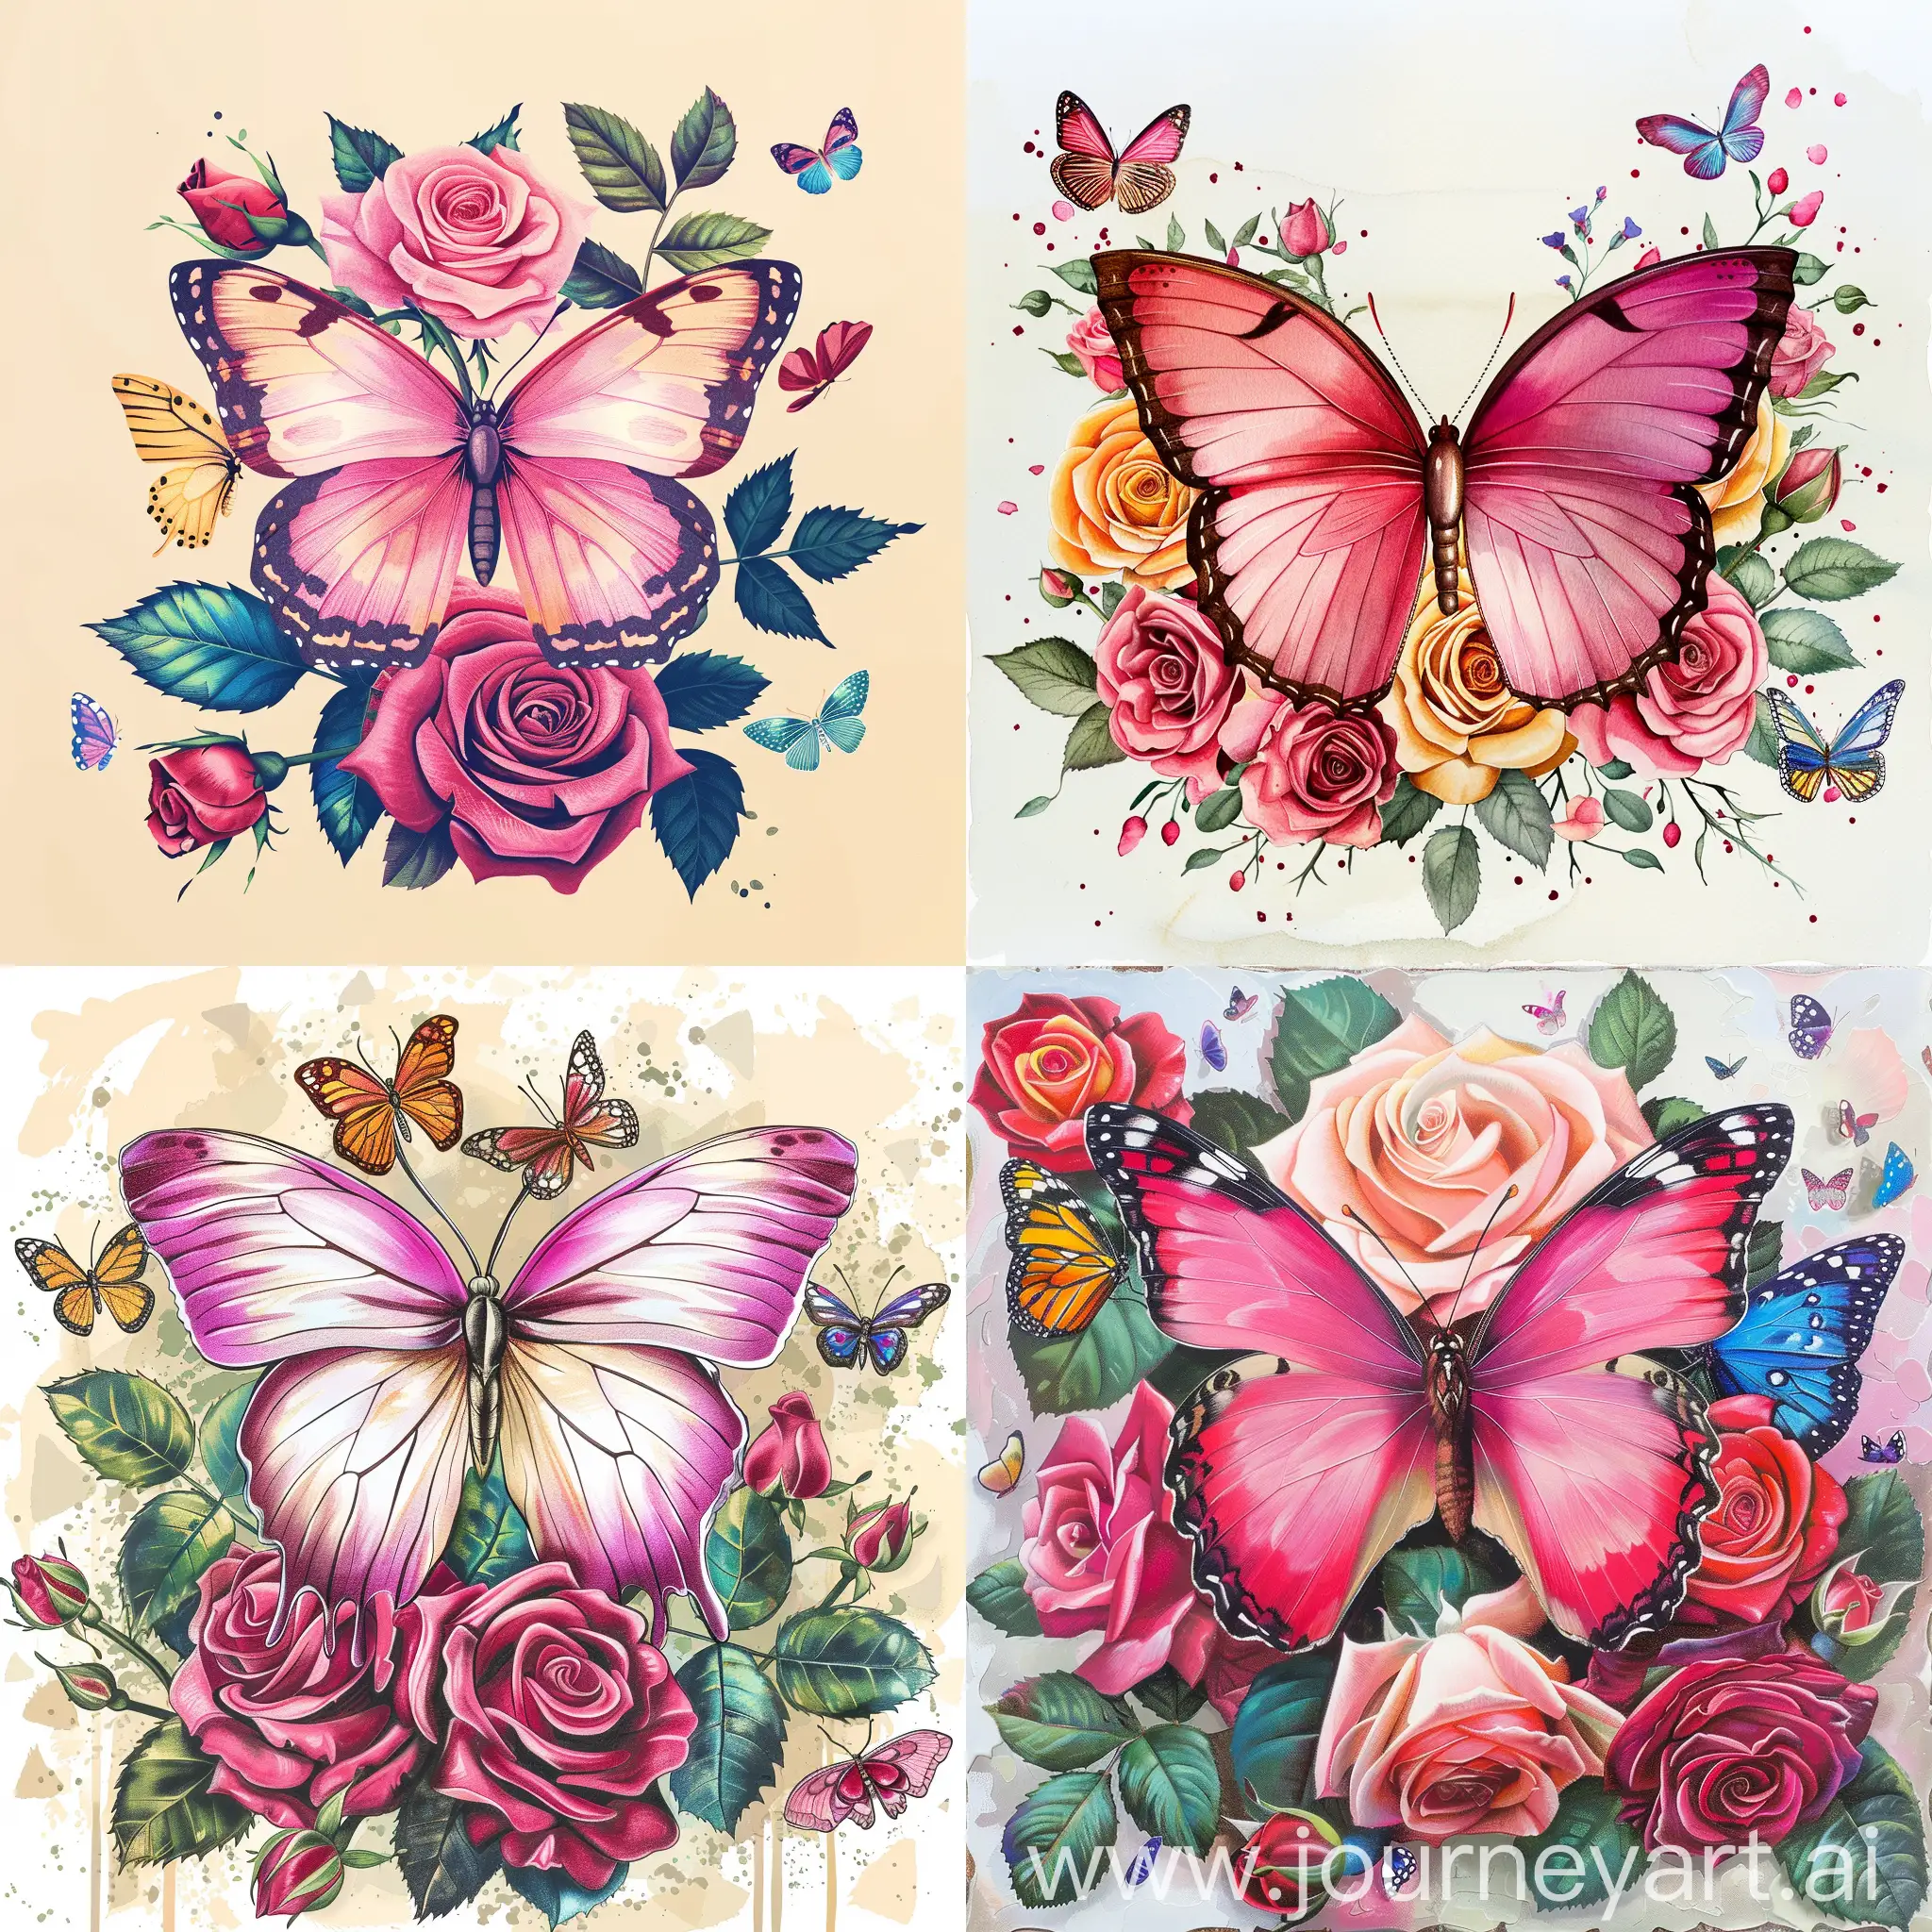 Pink-Butterfly-Surrounded-by-Colorful-Roses-and-Fluttering-Butterflies-Illustration